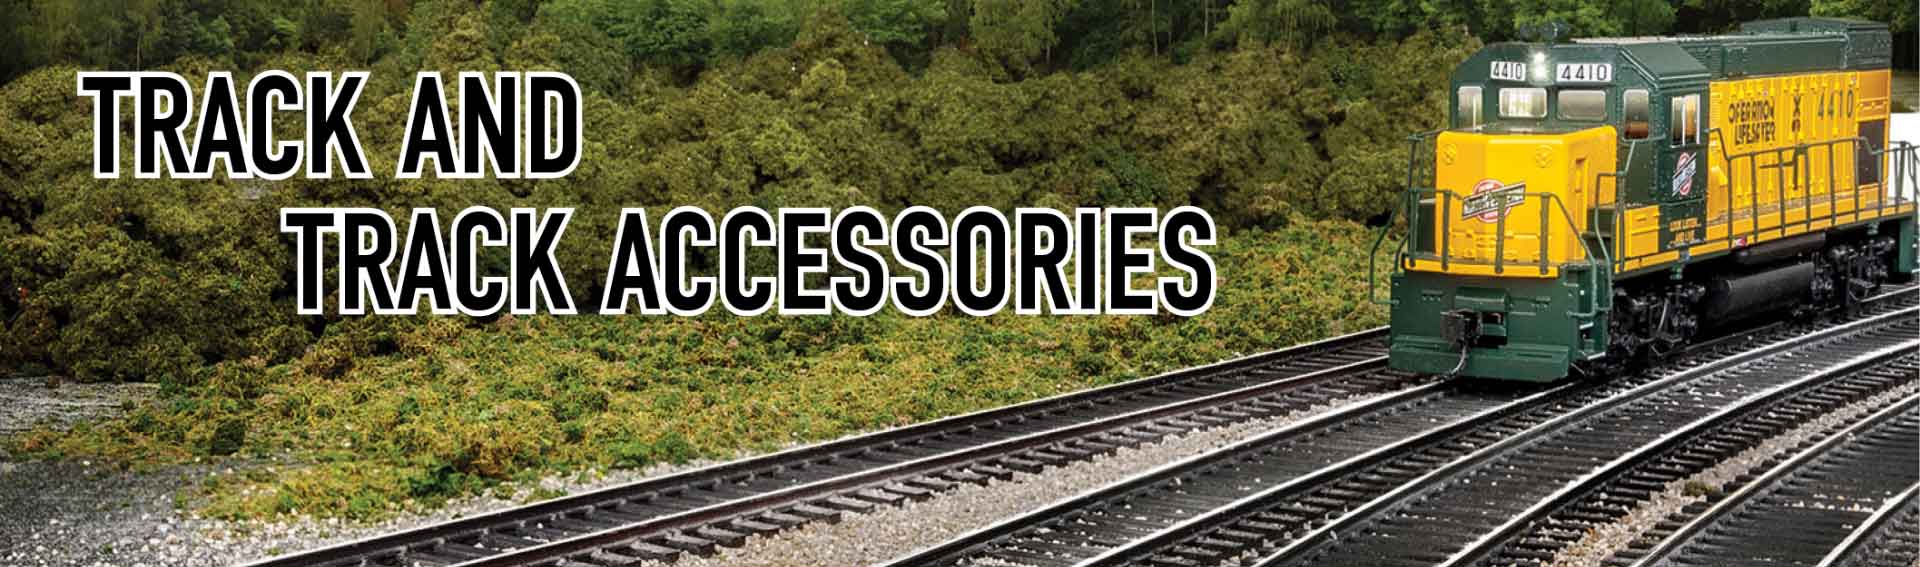 We carry extra track and track accessories to help fix and build your model railroad